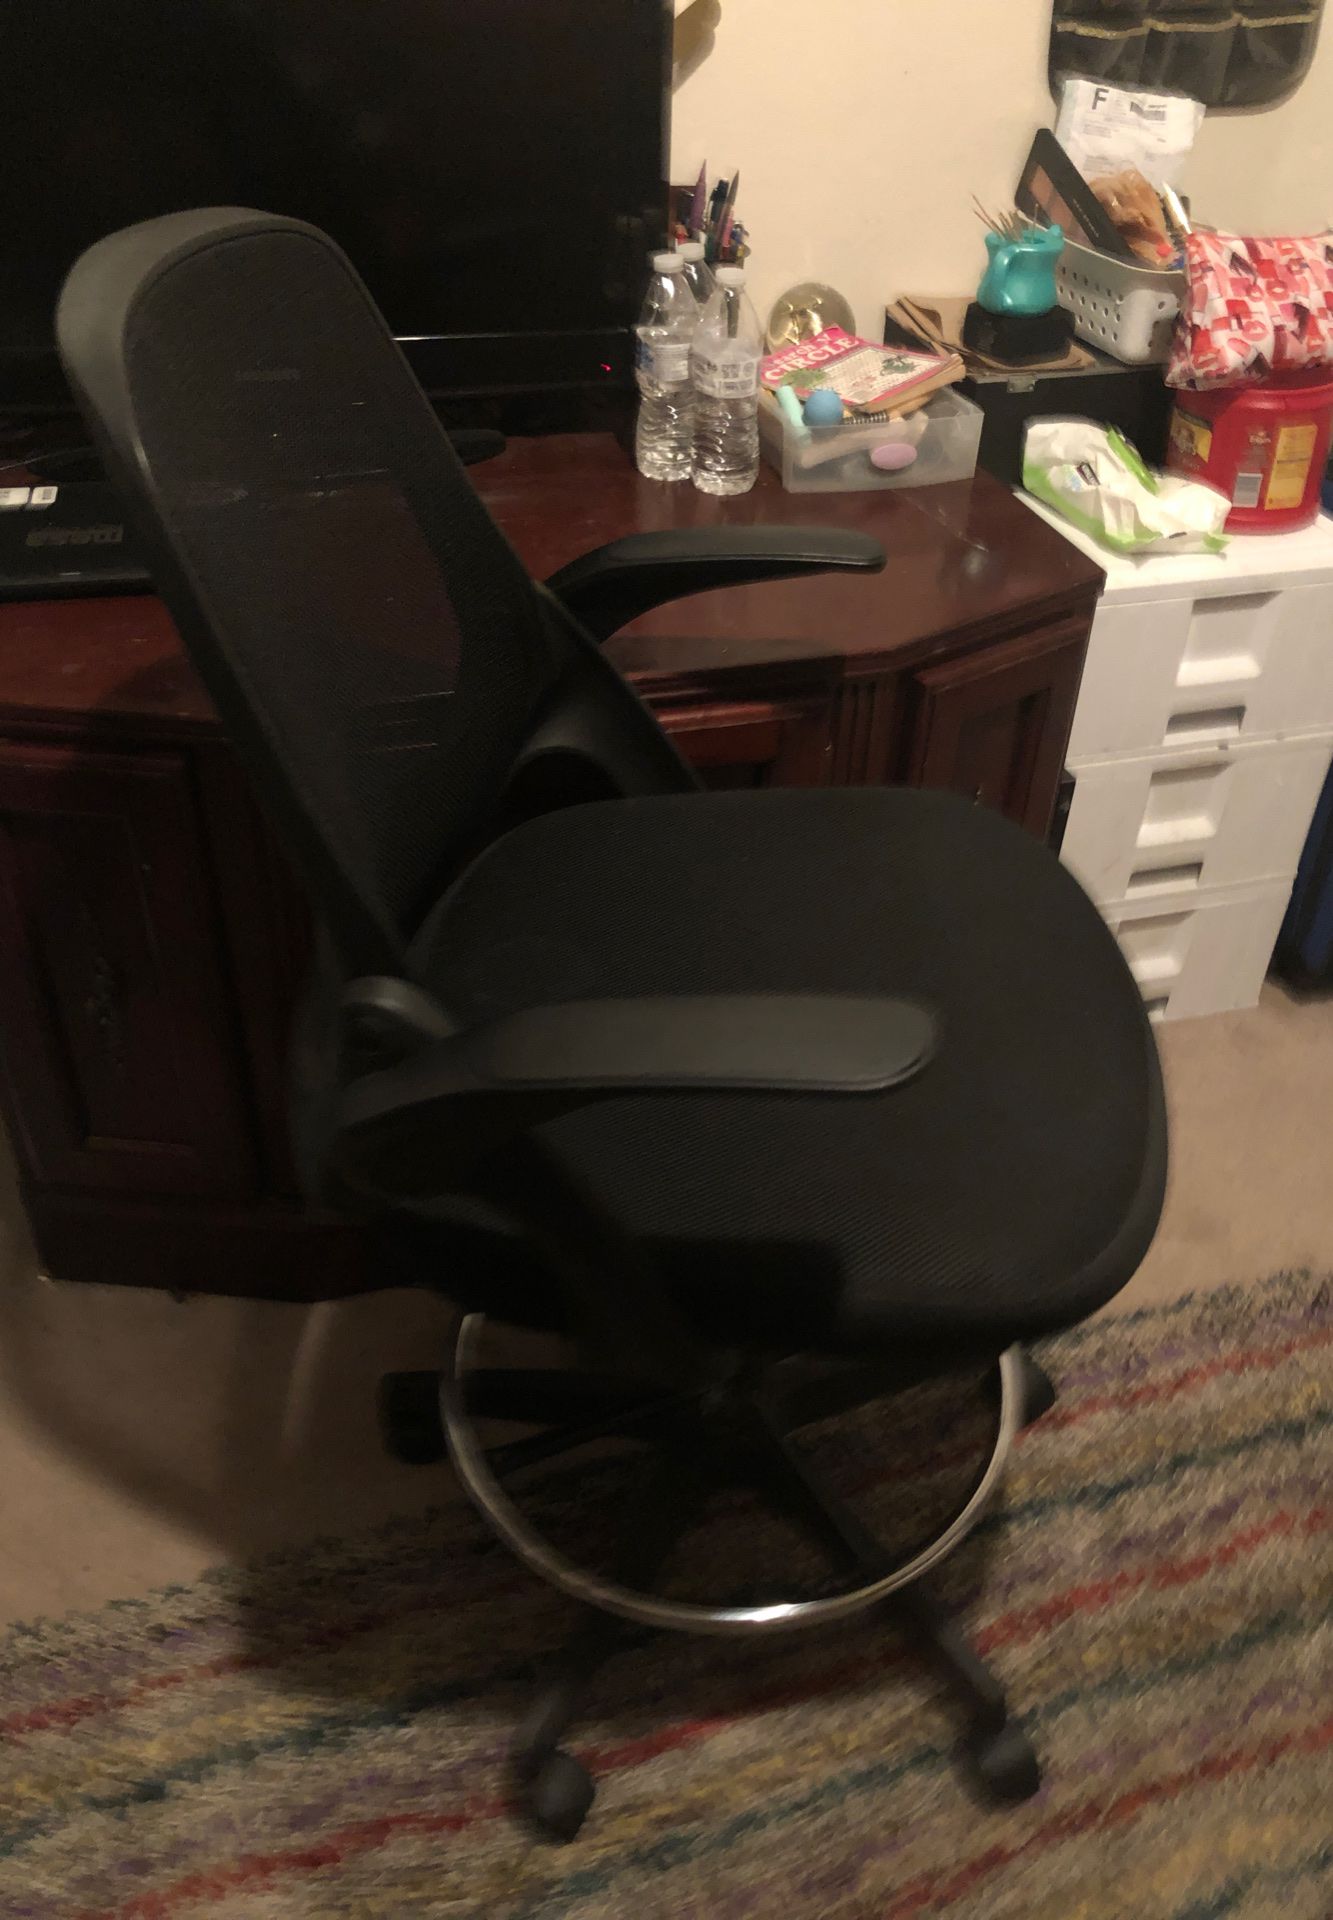 New and perfect office chair $50